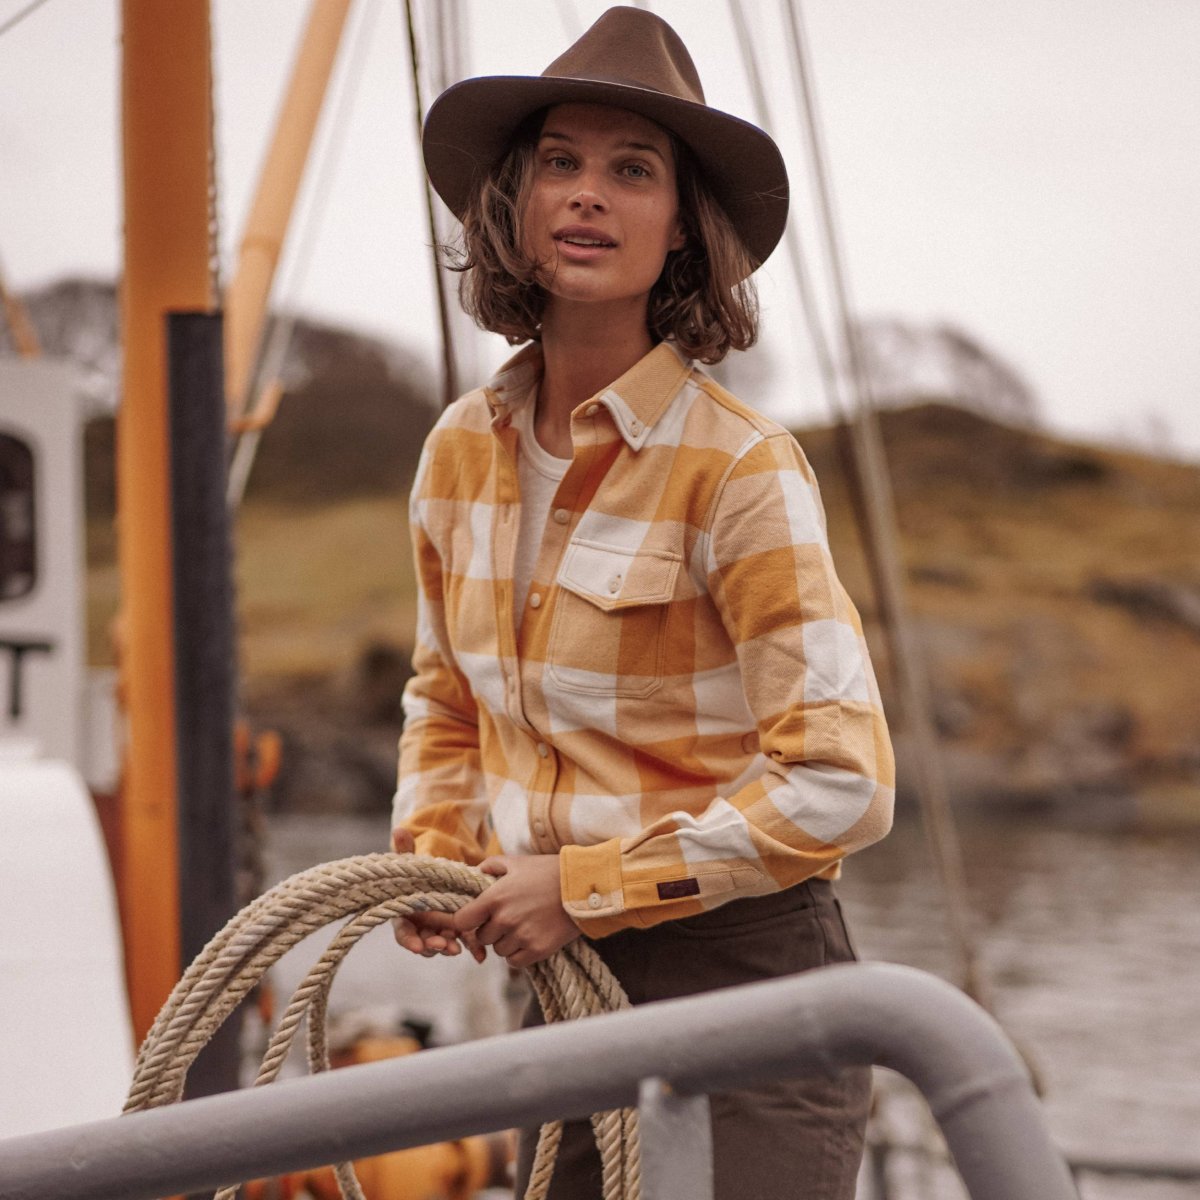 Checks in fresh colours and a comforting fabric: the Tanea shirt is a basic to have in your wardrobe all year round.